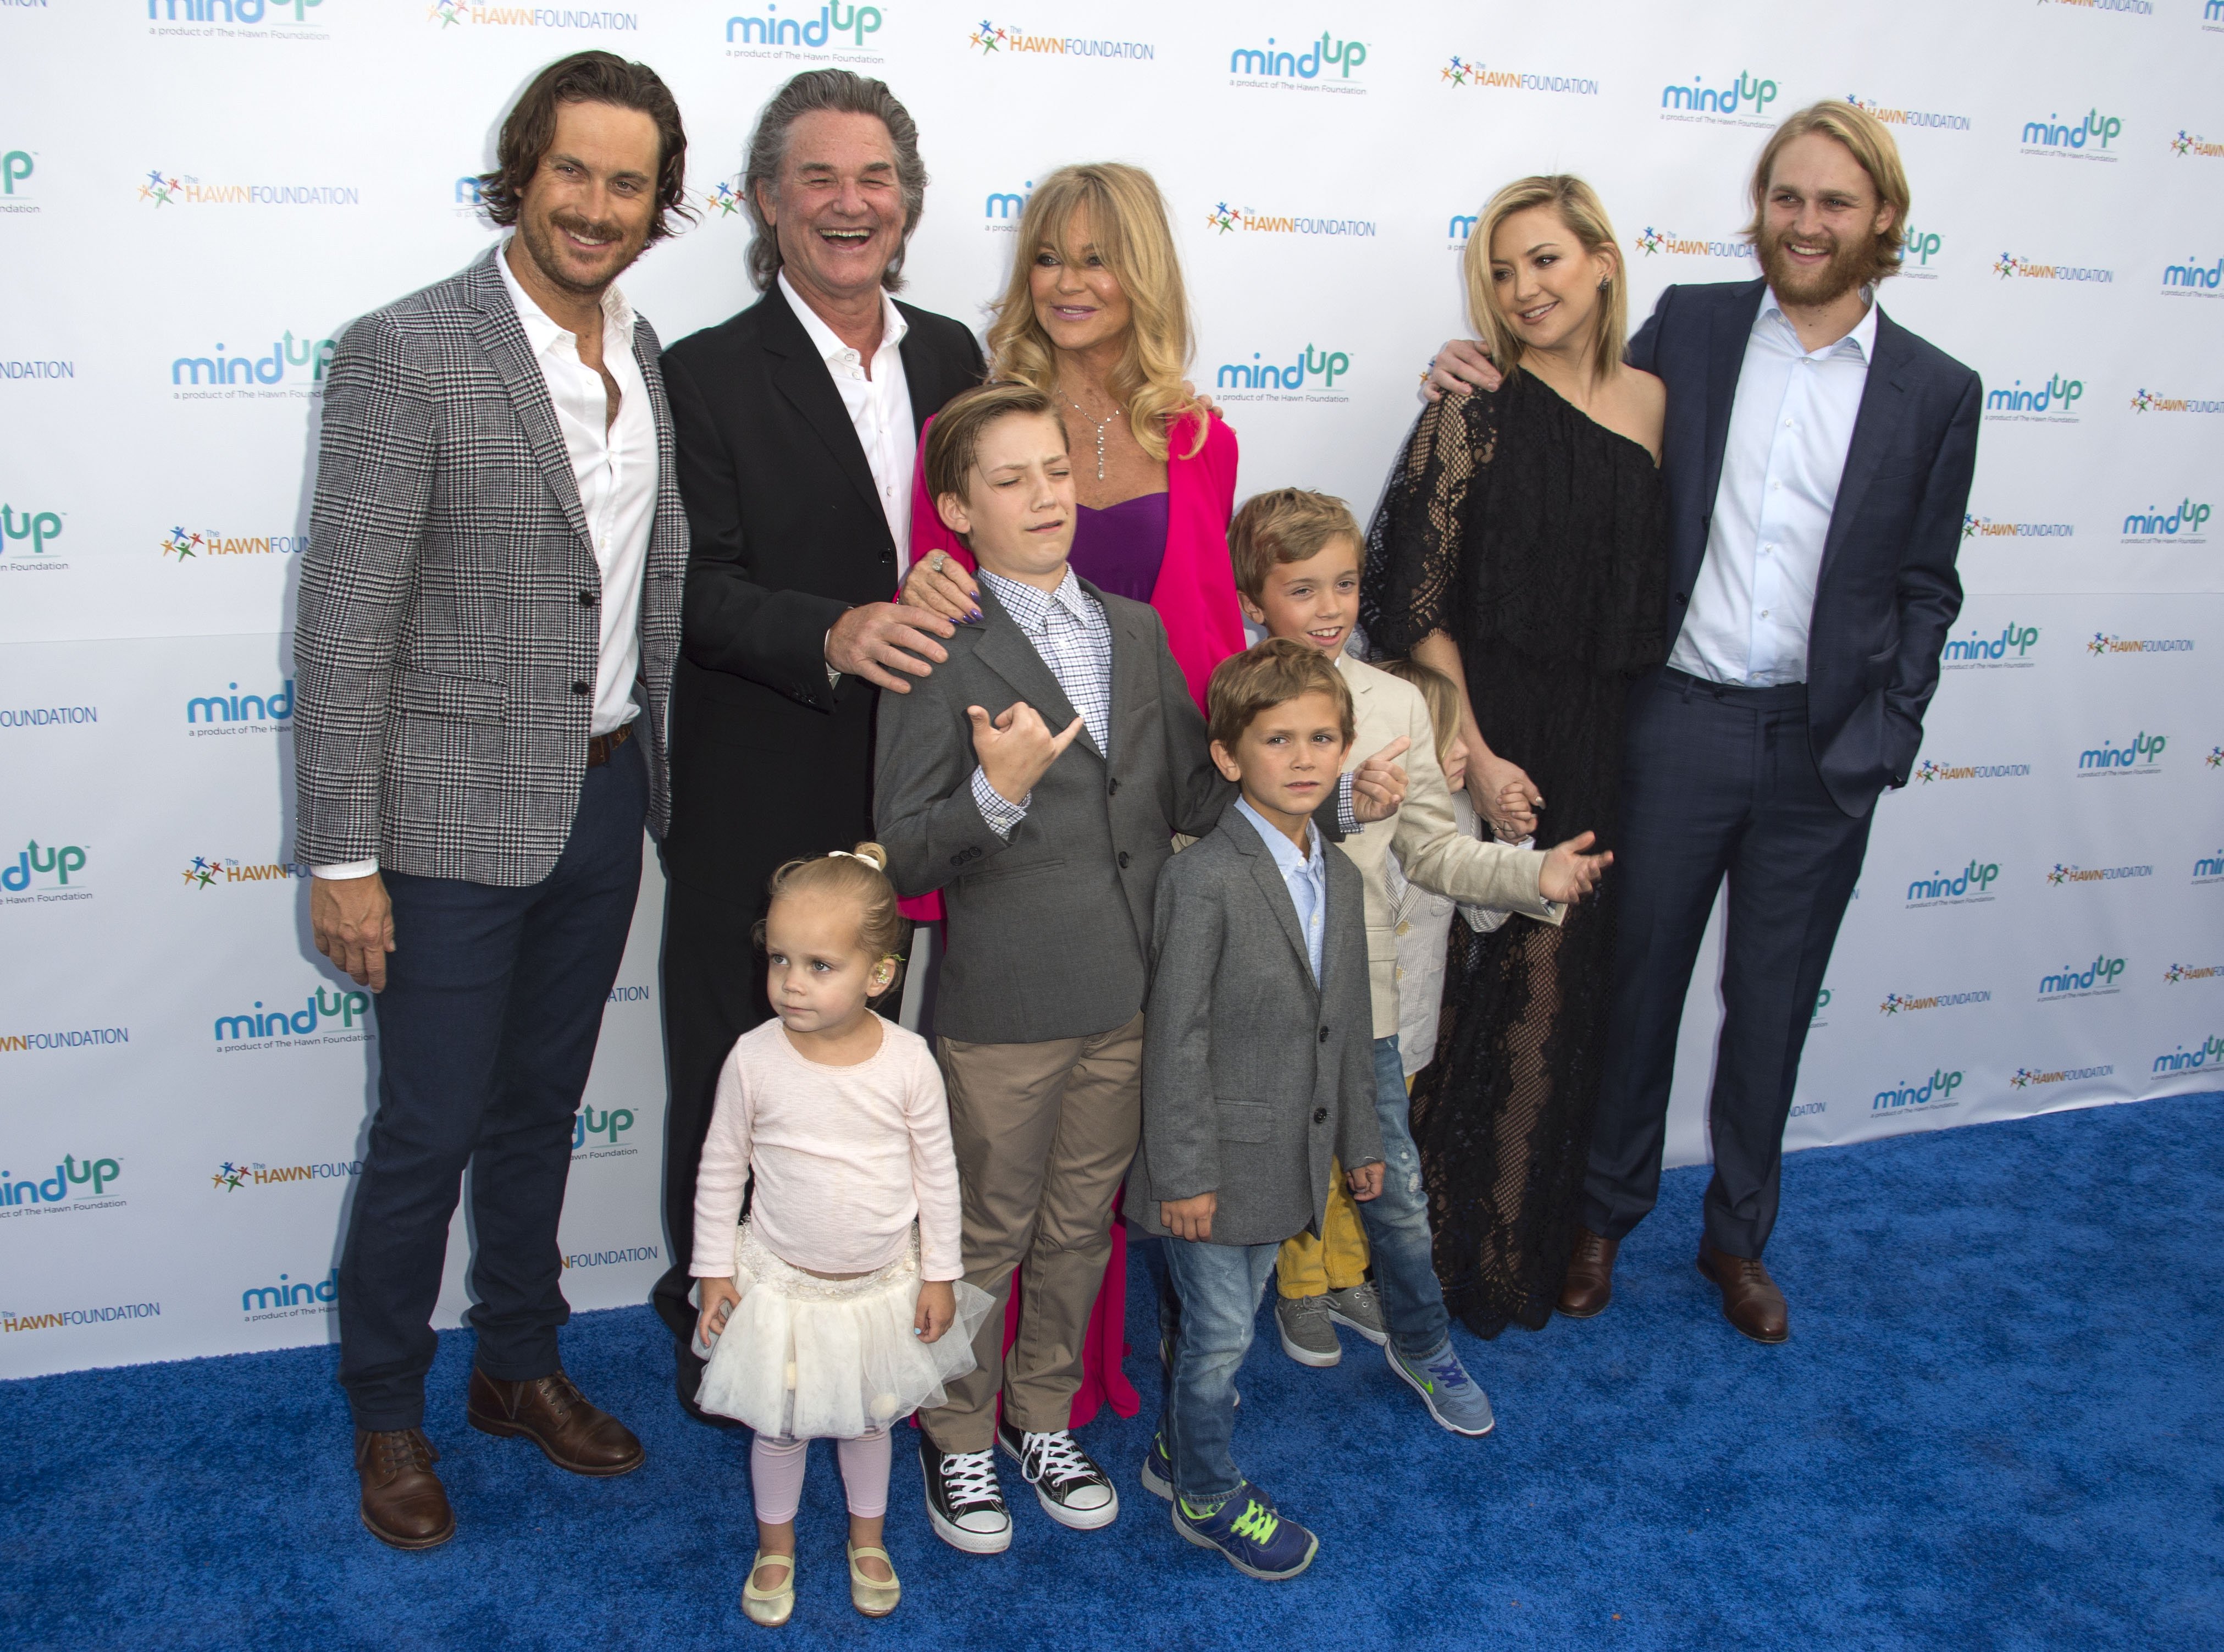 Oliver Hudson, Kurt Russell, Goldie Hawn, Wyatt Russell and Kate Hudson with kids Ryder Robinson, Wilder Hudson, Bodhi Hudson, Rio Hudson and Bingham Bellamy attend Goldie Hawn's Annual "Goldie's Love in for Kids" Event, in Beverly Hills, California, on May 6, 2016. | Photo: Getty Images